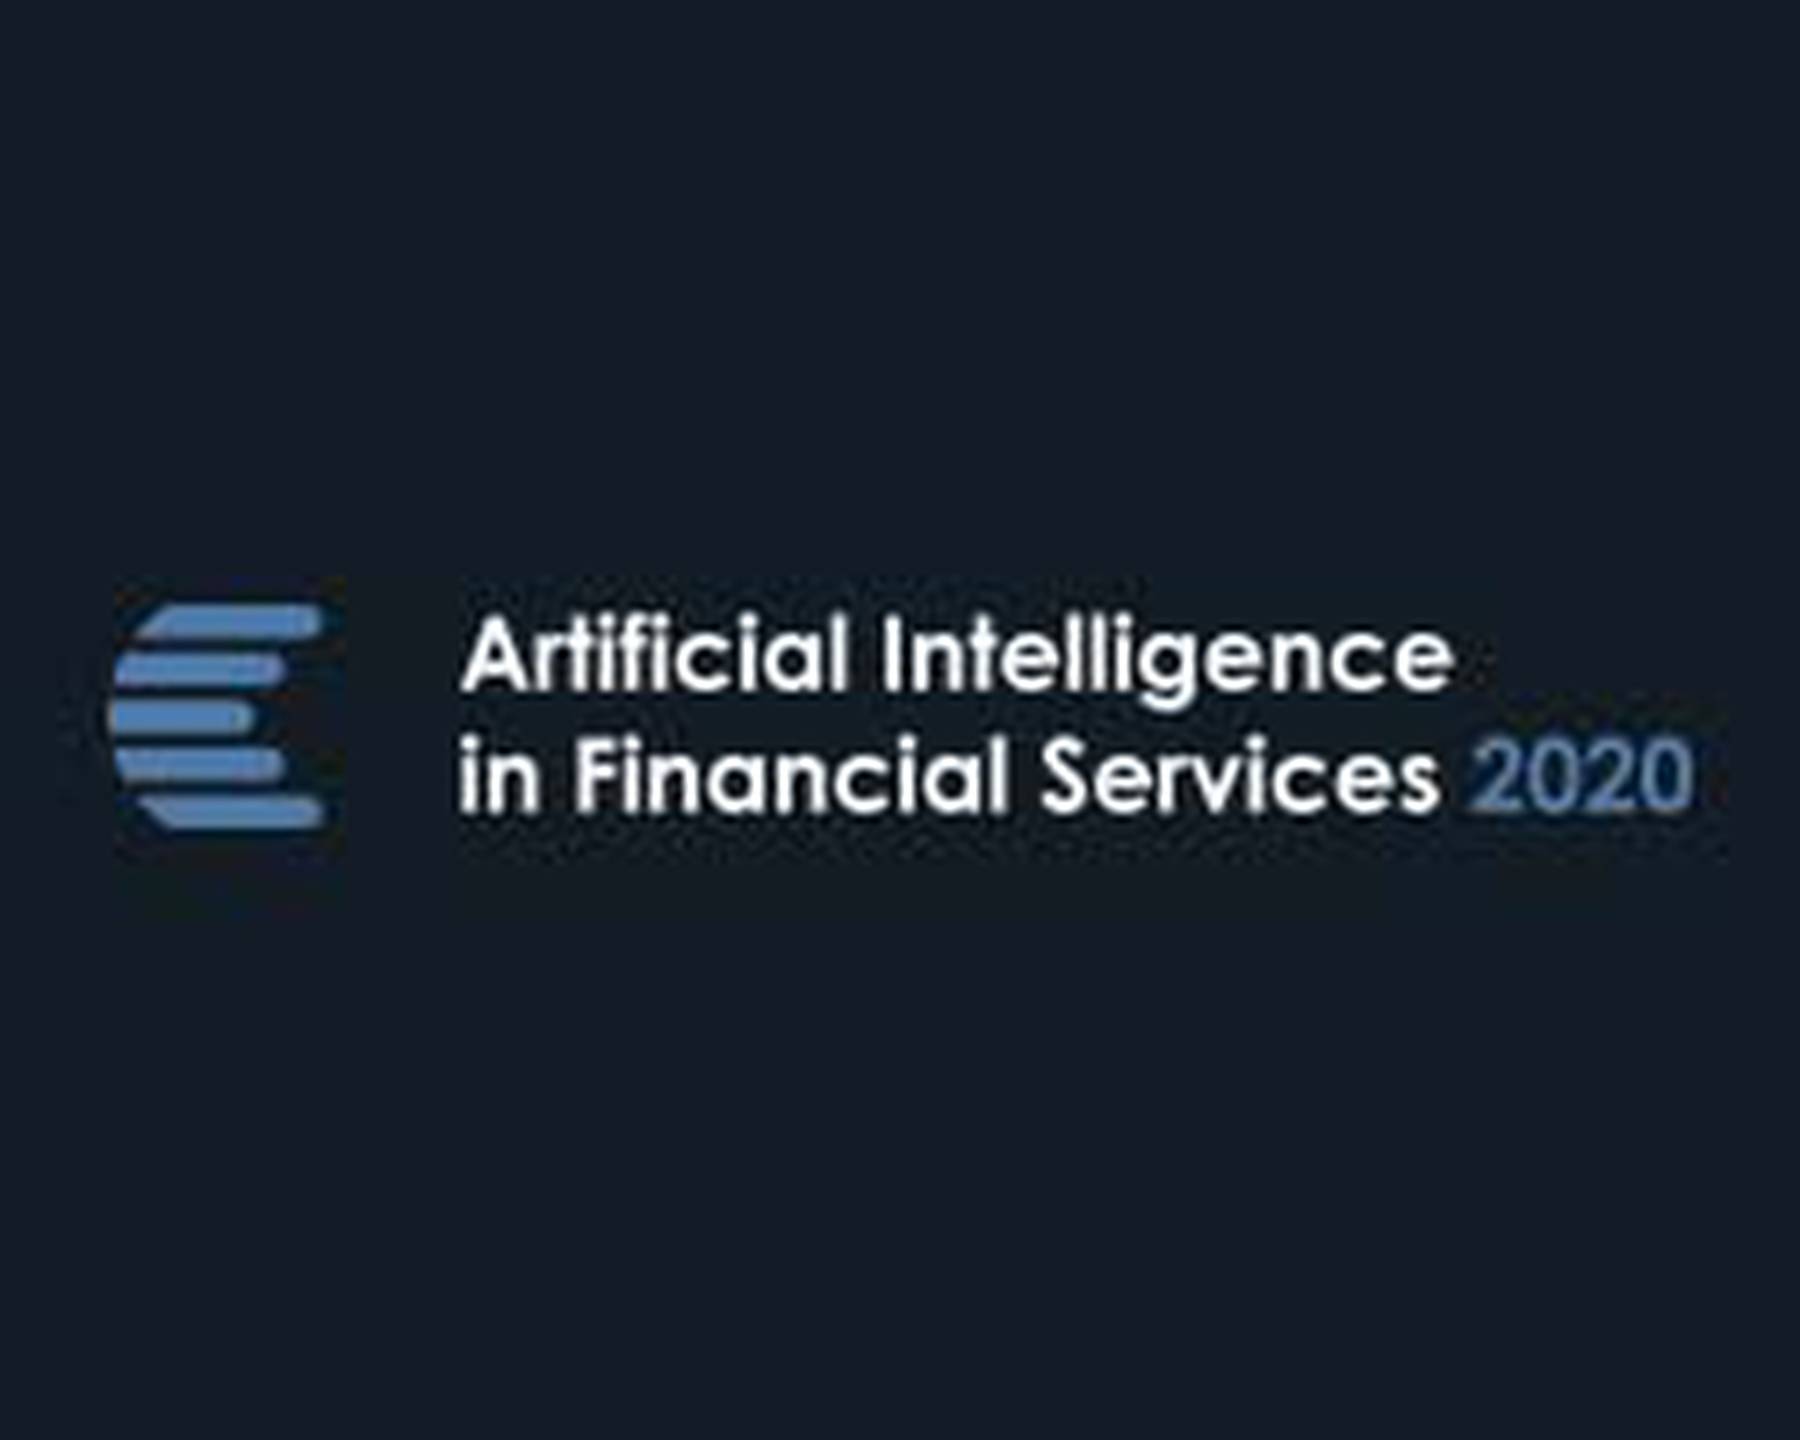 Artificial Intelligence in Financial Services London 2020